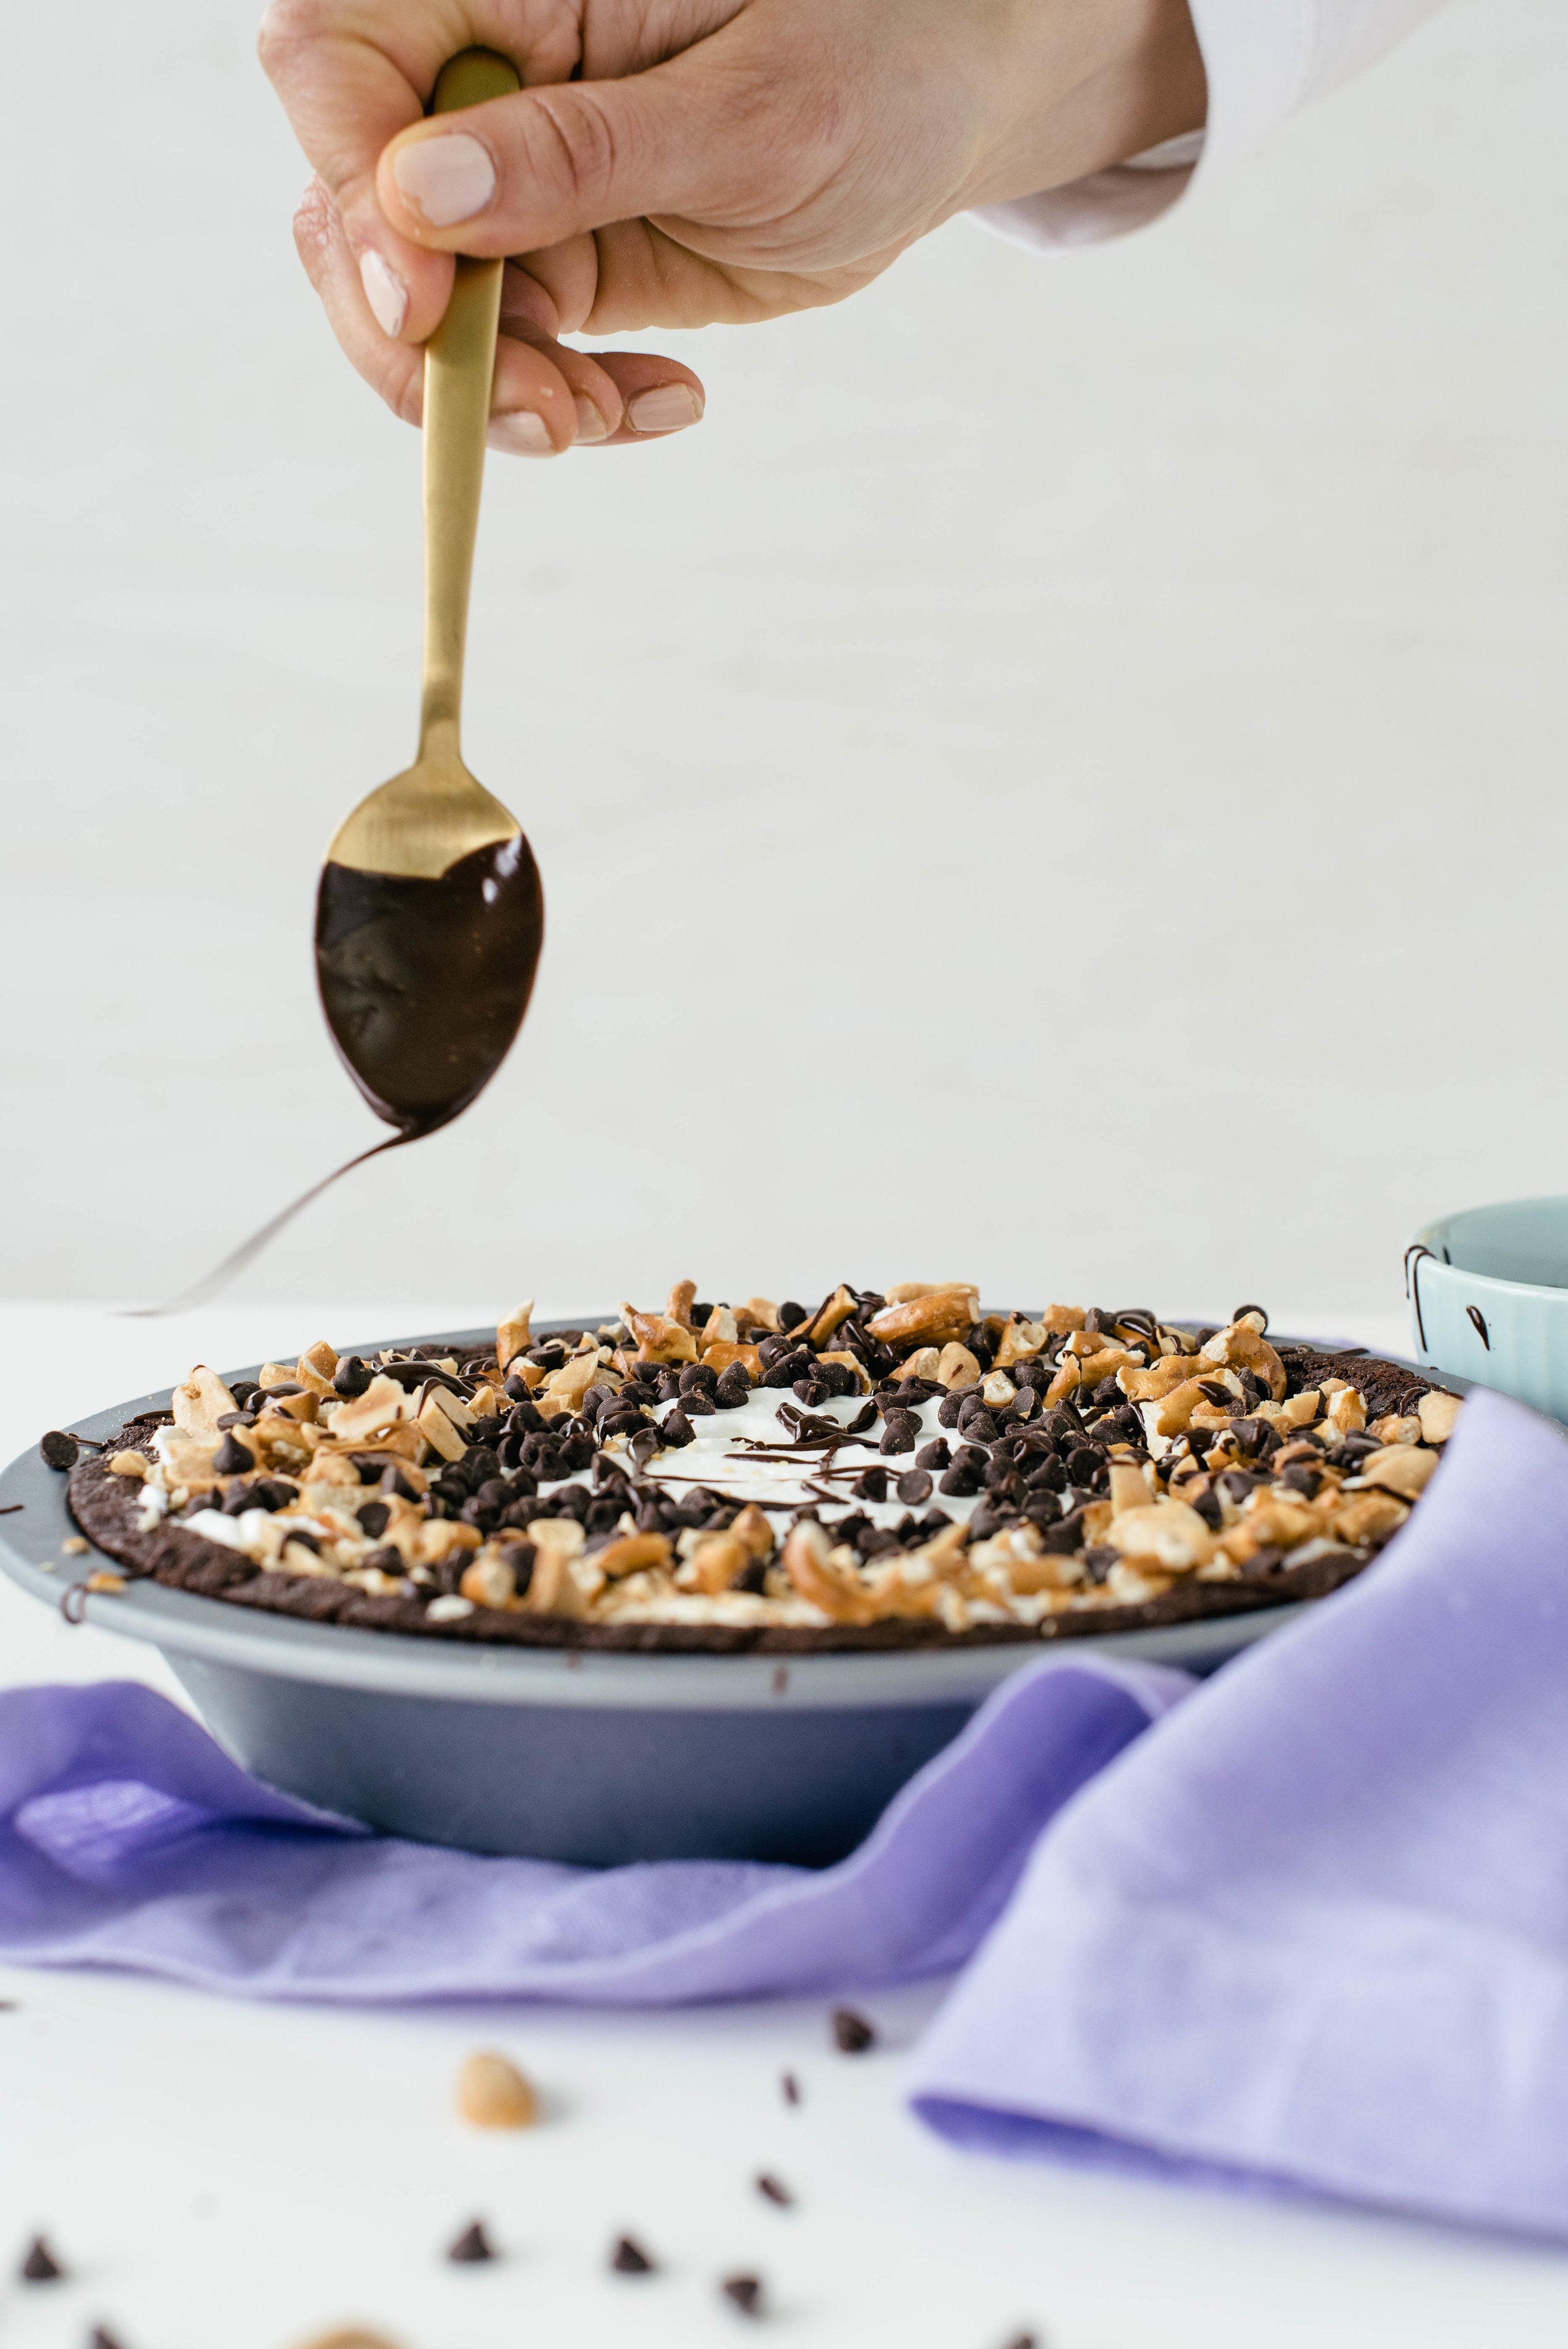 Image of a hand drizzling chocolate off a spoon onto Miss Jones Baking Co Salted Caramel Brownie Pie